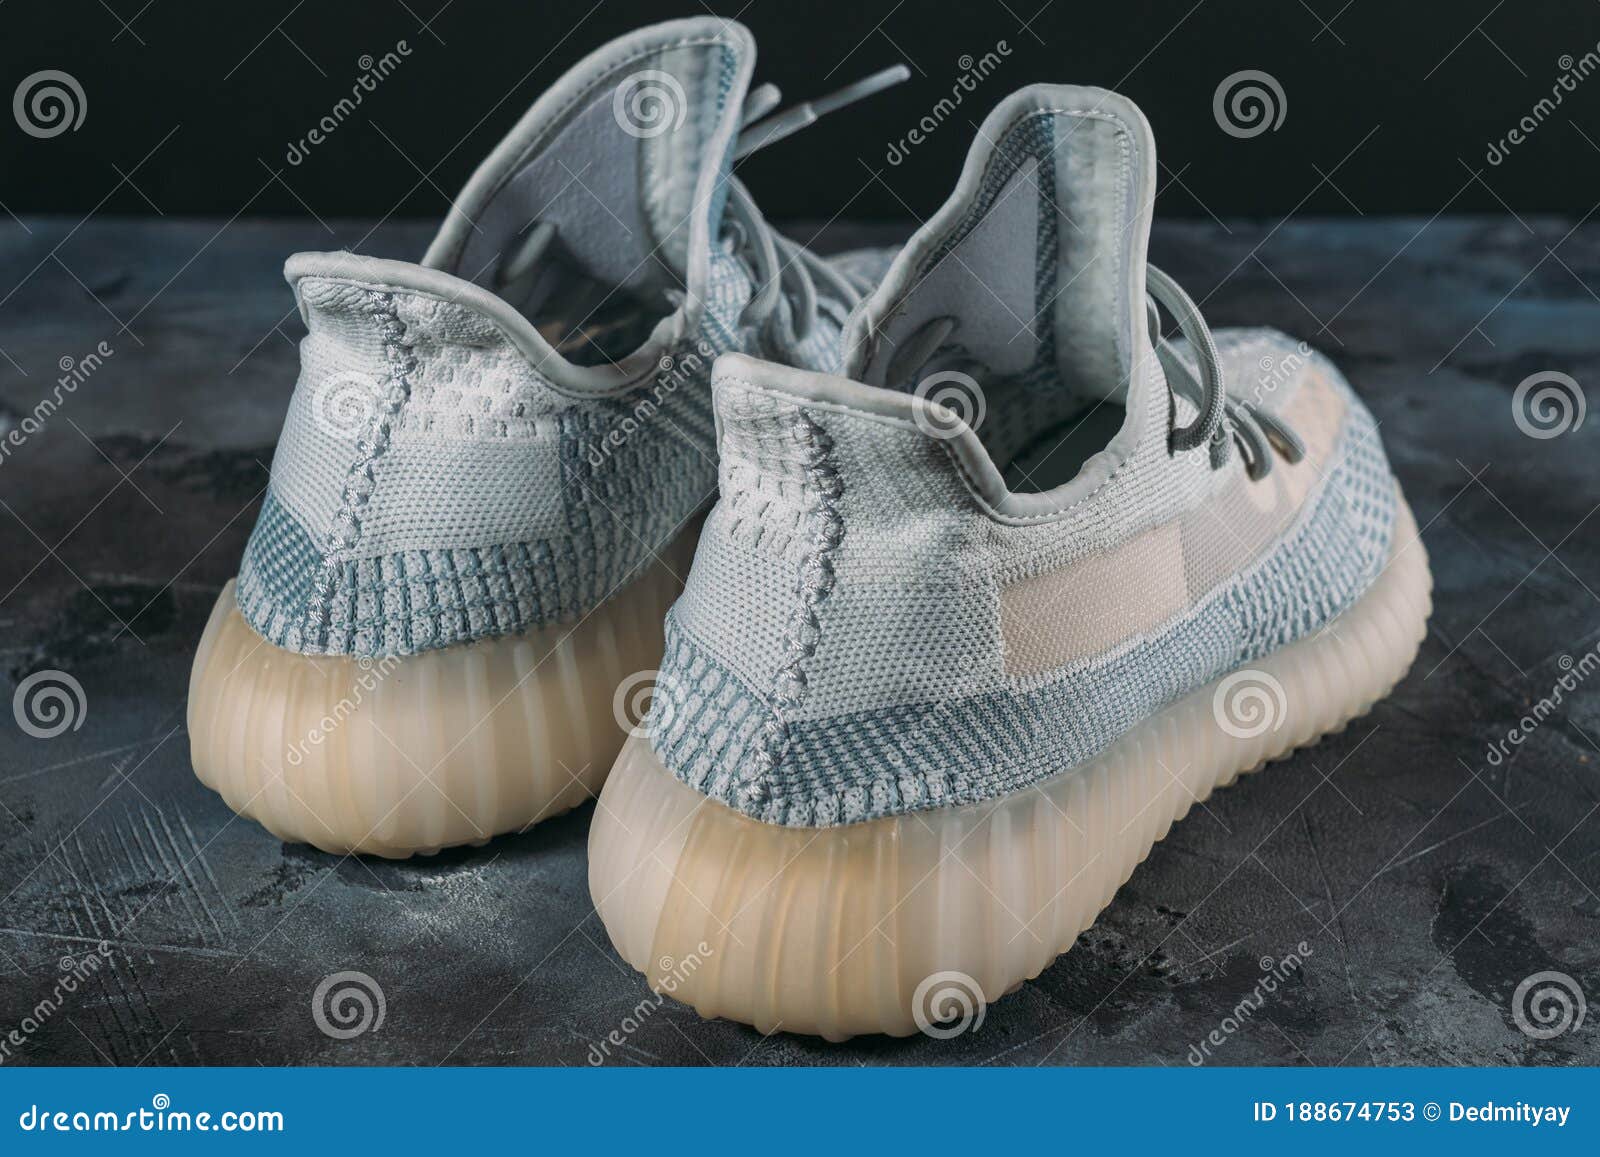 yeezy boost 350 limited